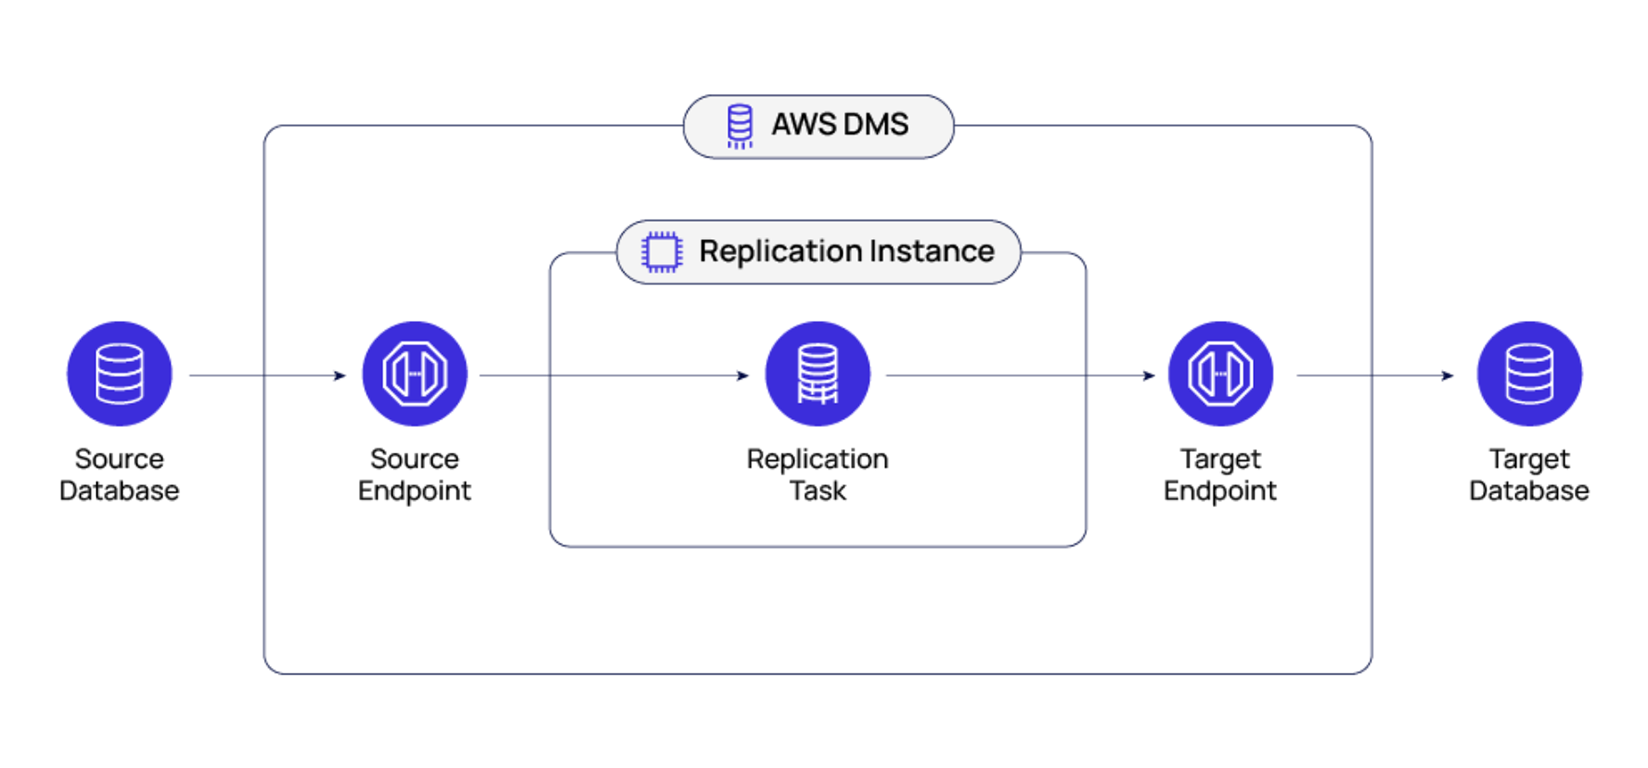 Core Components of AWS DMS Service